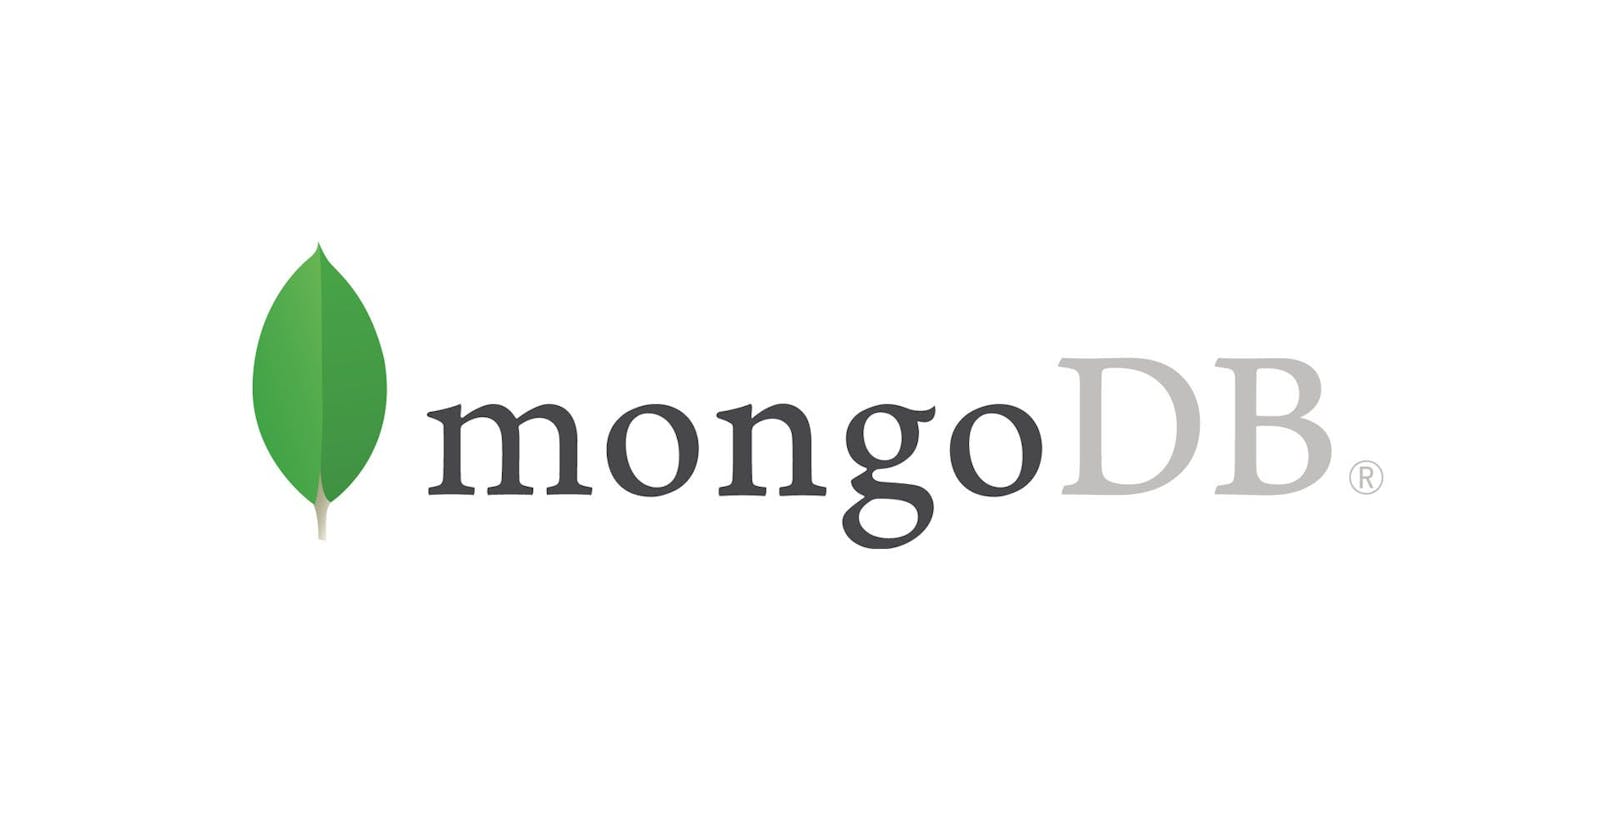 What is aggregation pipeline in Mongodb?